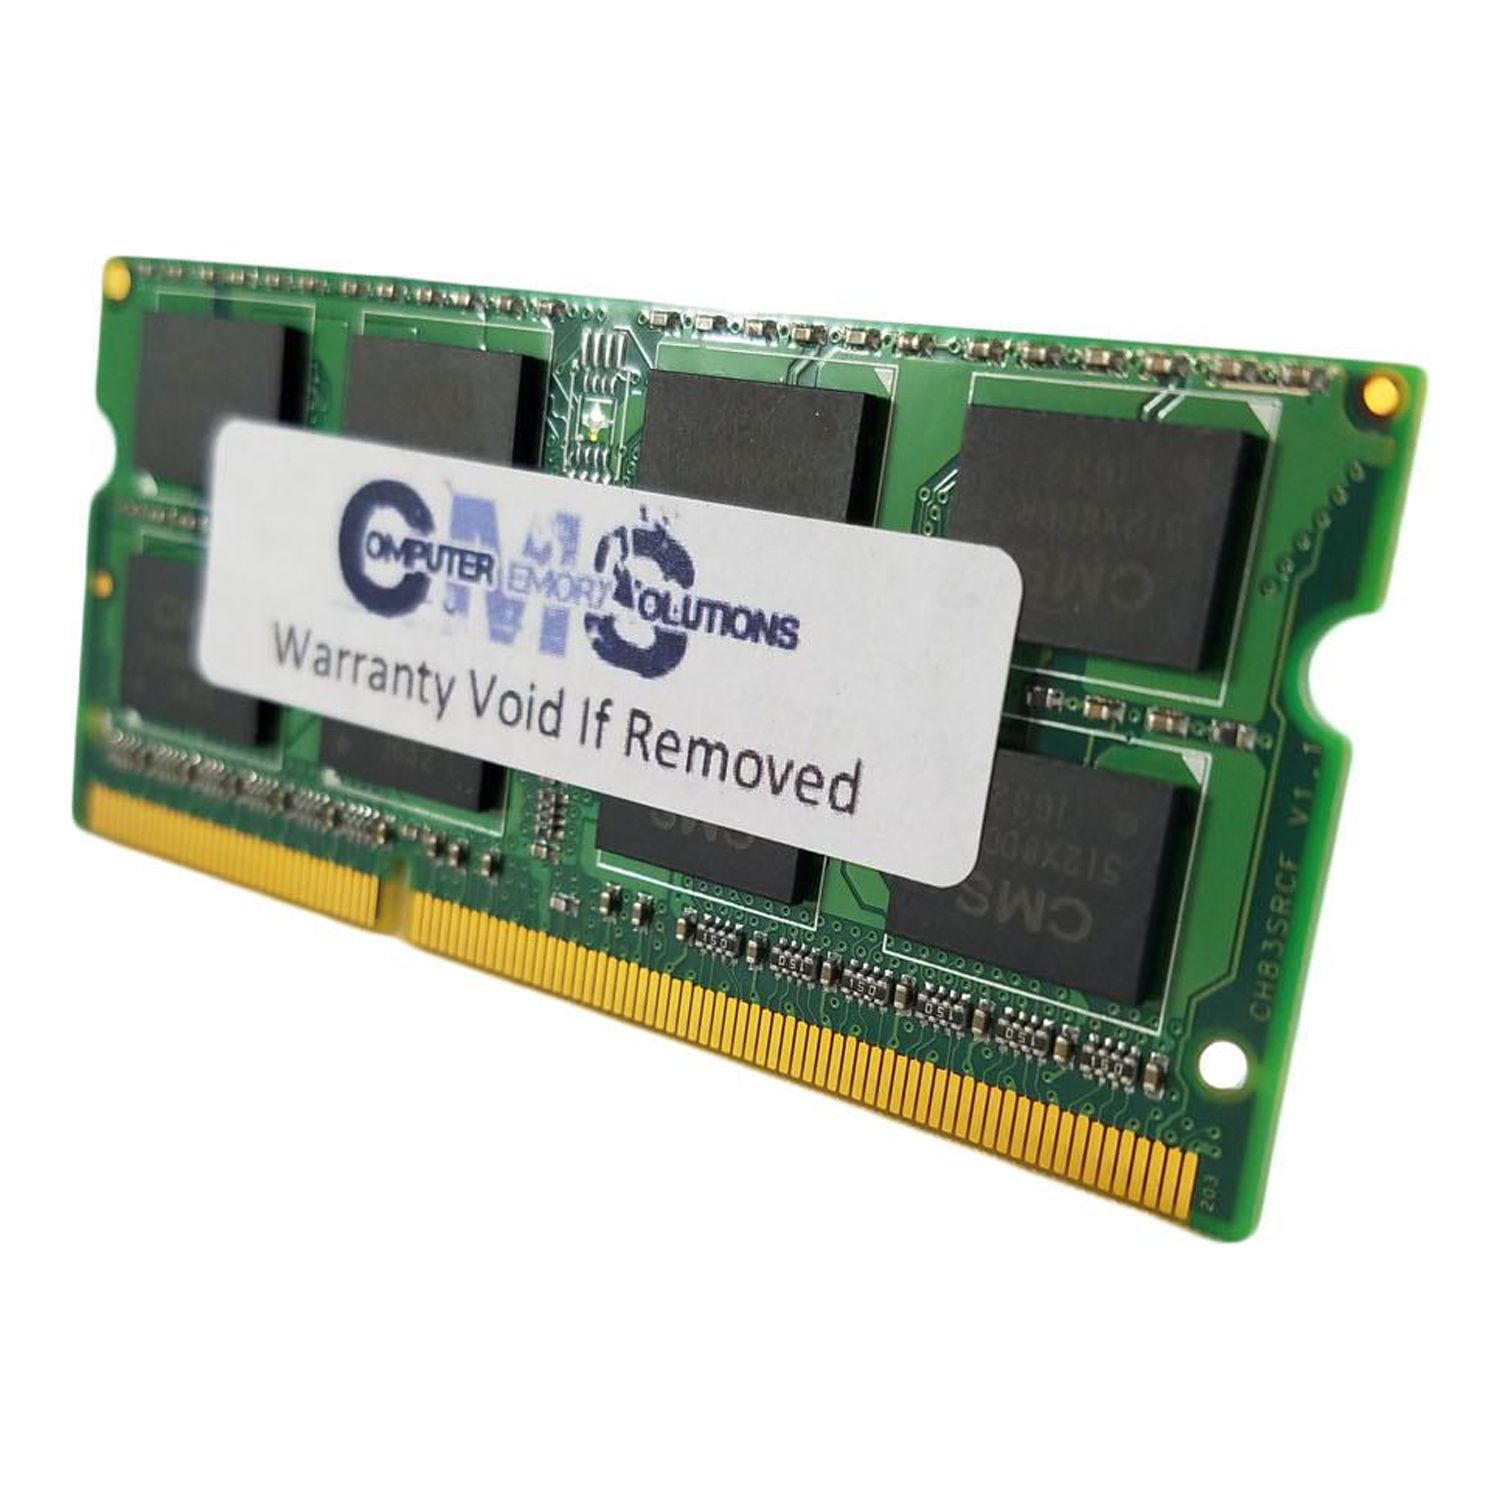 CMS 4GB (1X4GB) DDR3 10600 1333MHZ NON ECC SODIMM Memory Ram Compatible with Panasonic Toughbook Cf-53, Cf-53A, Cf-53C - A30 - image 3 of 3